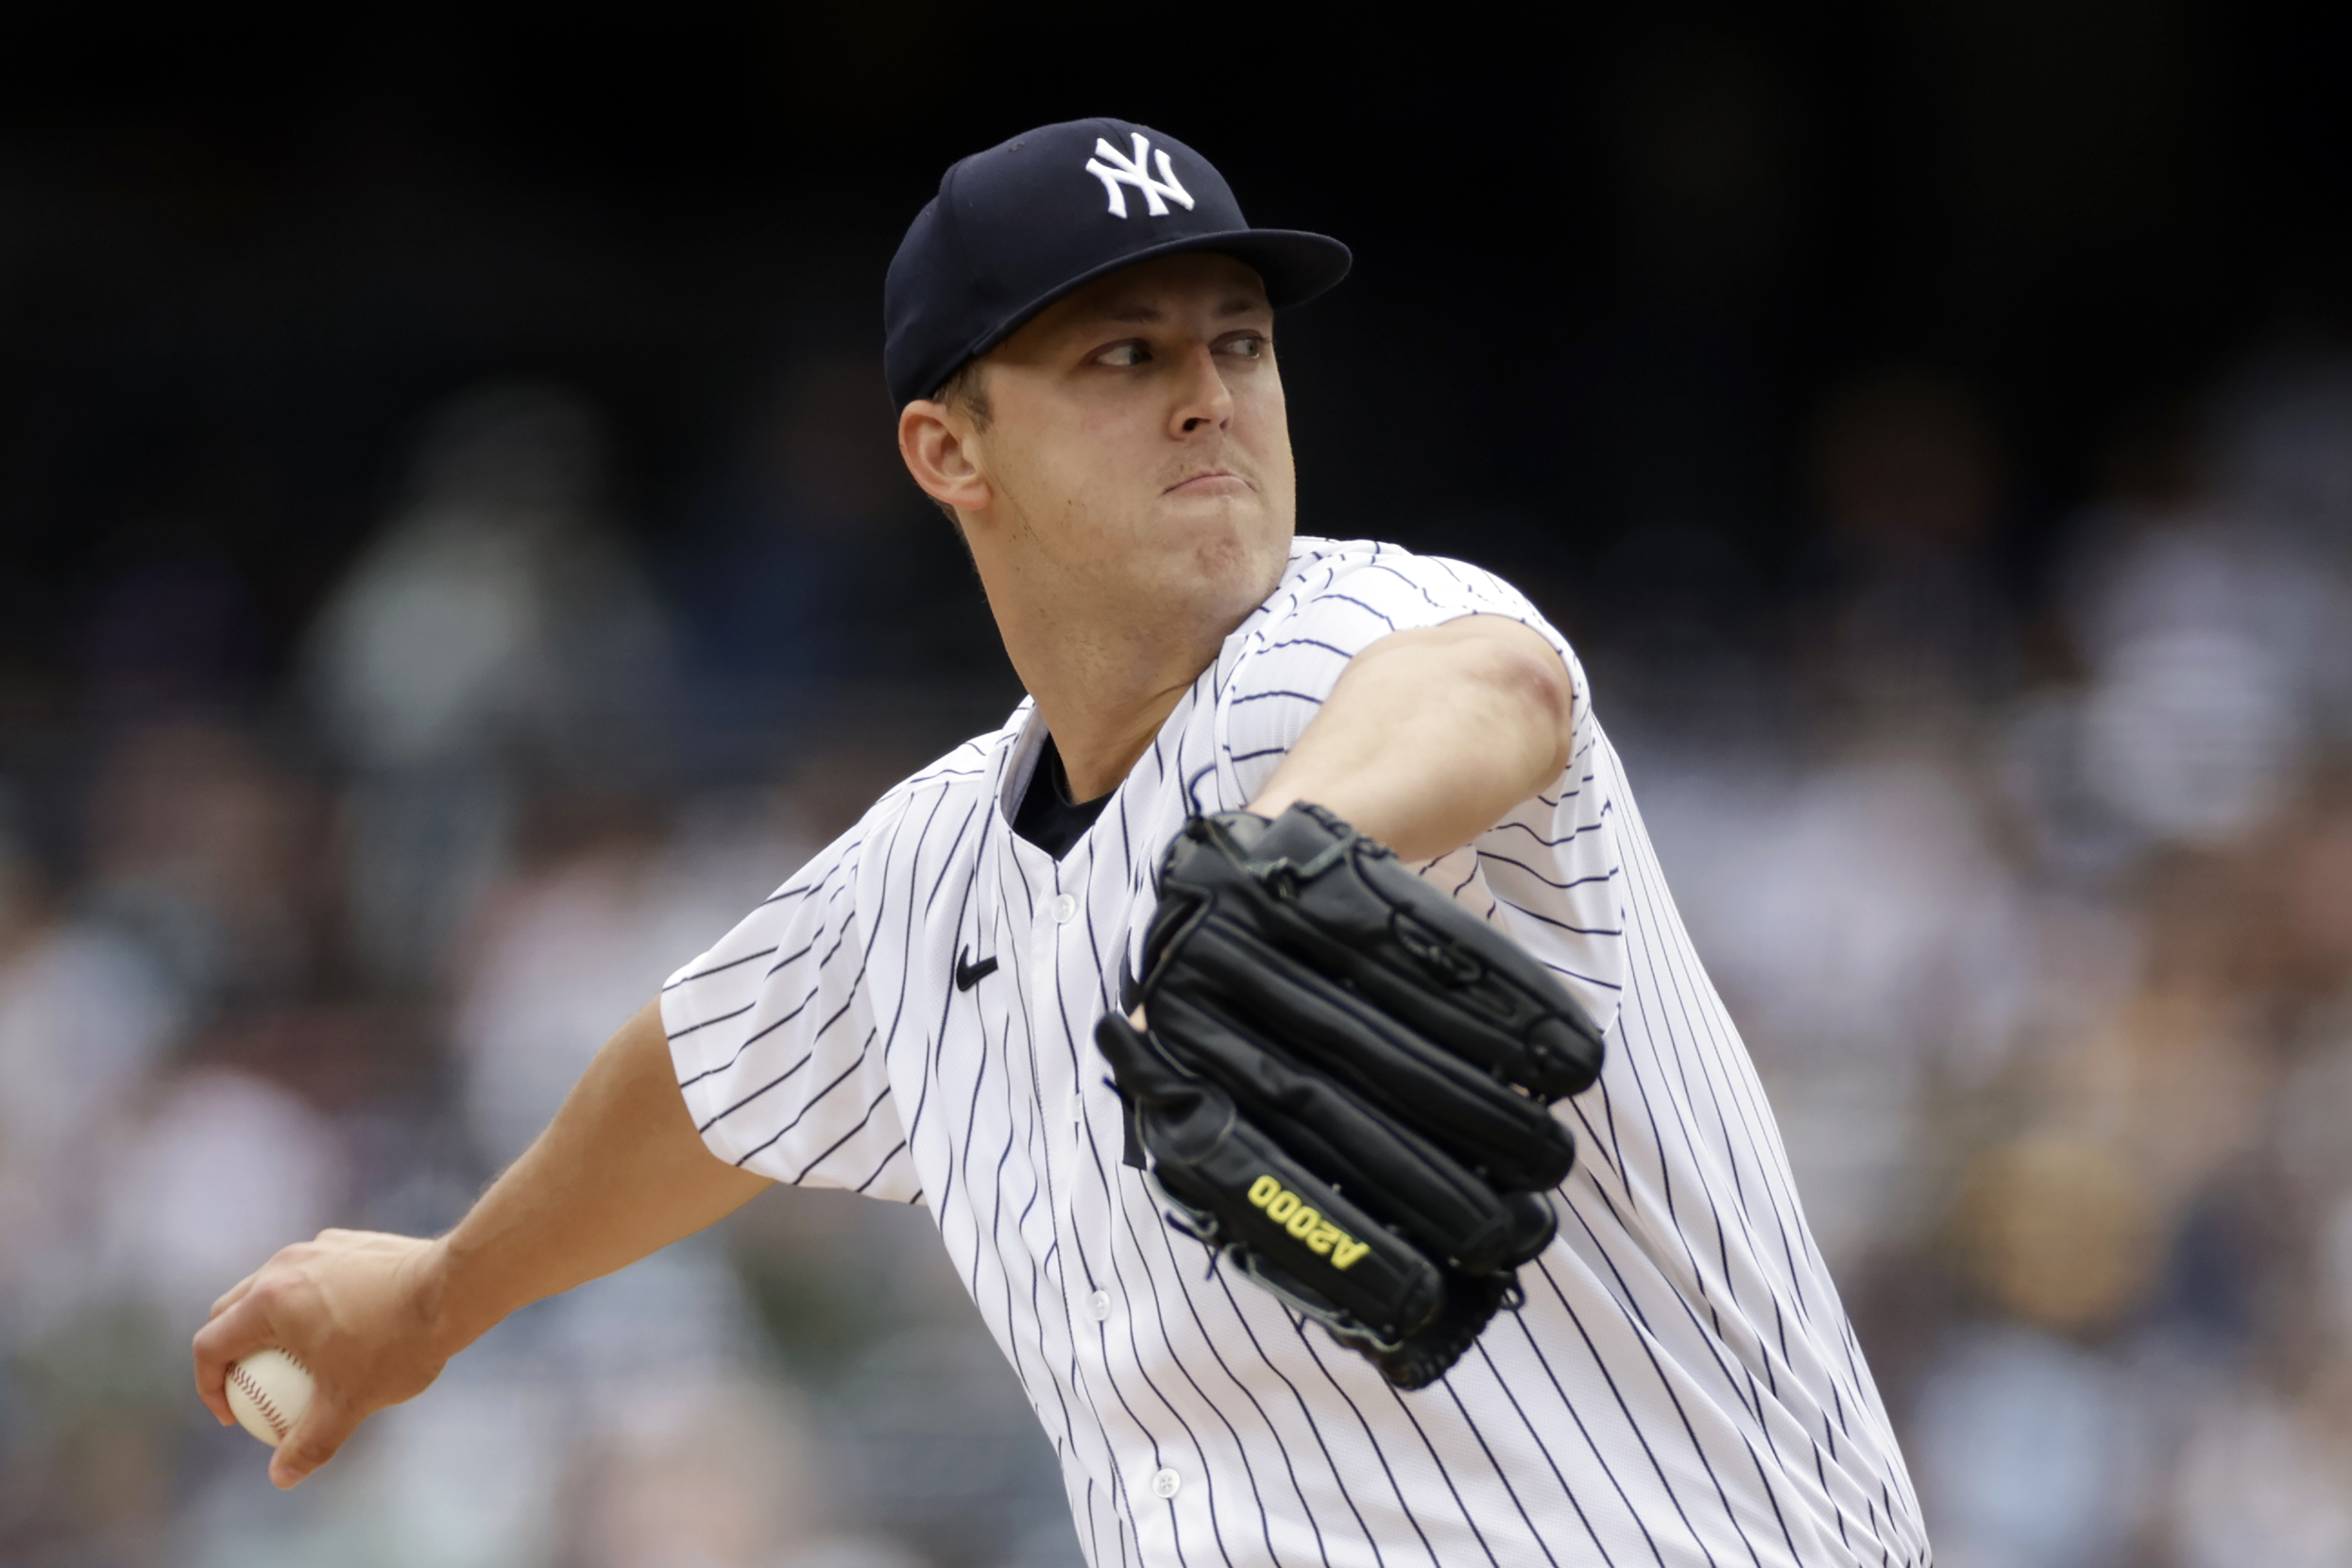 New York Yankees roster 2022: Which players should stay or go